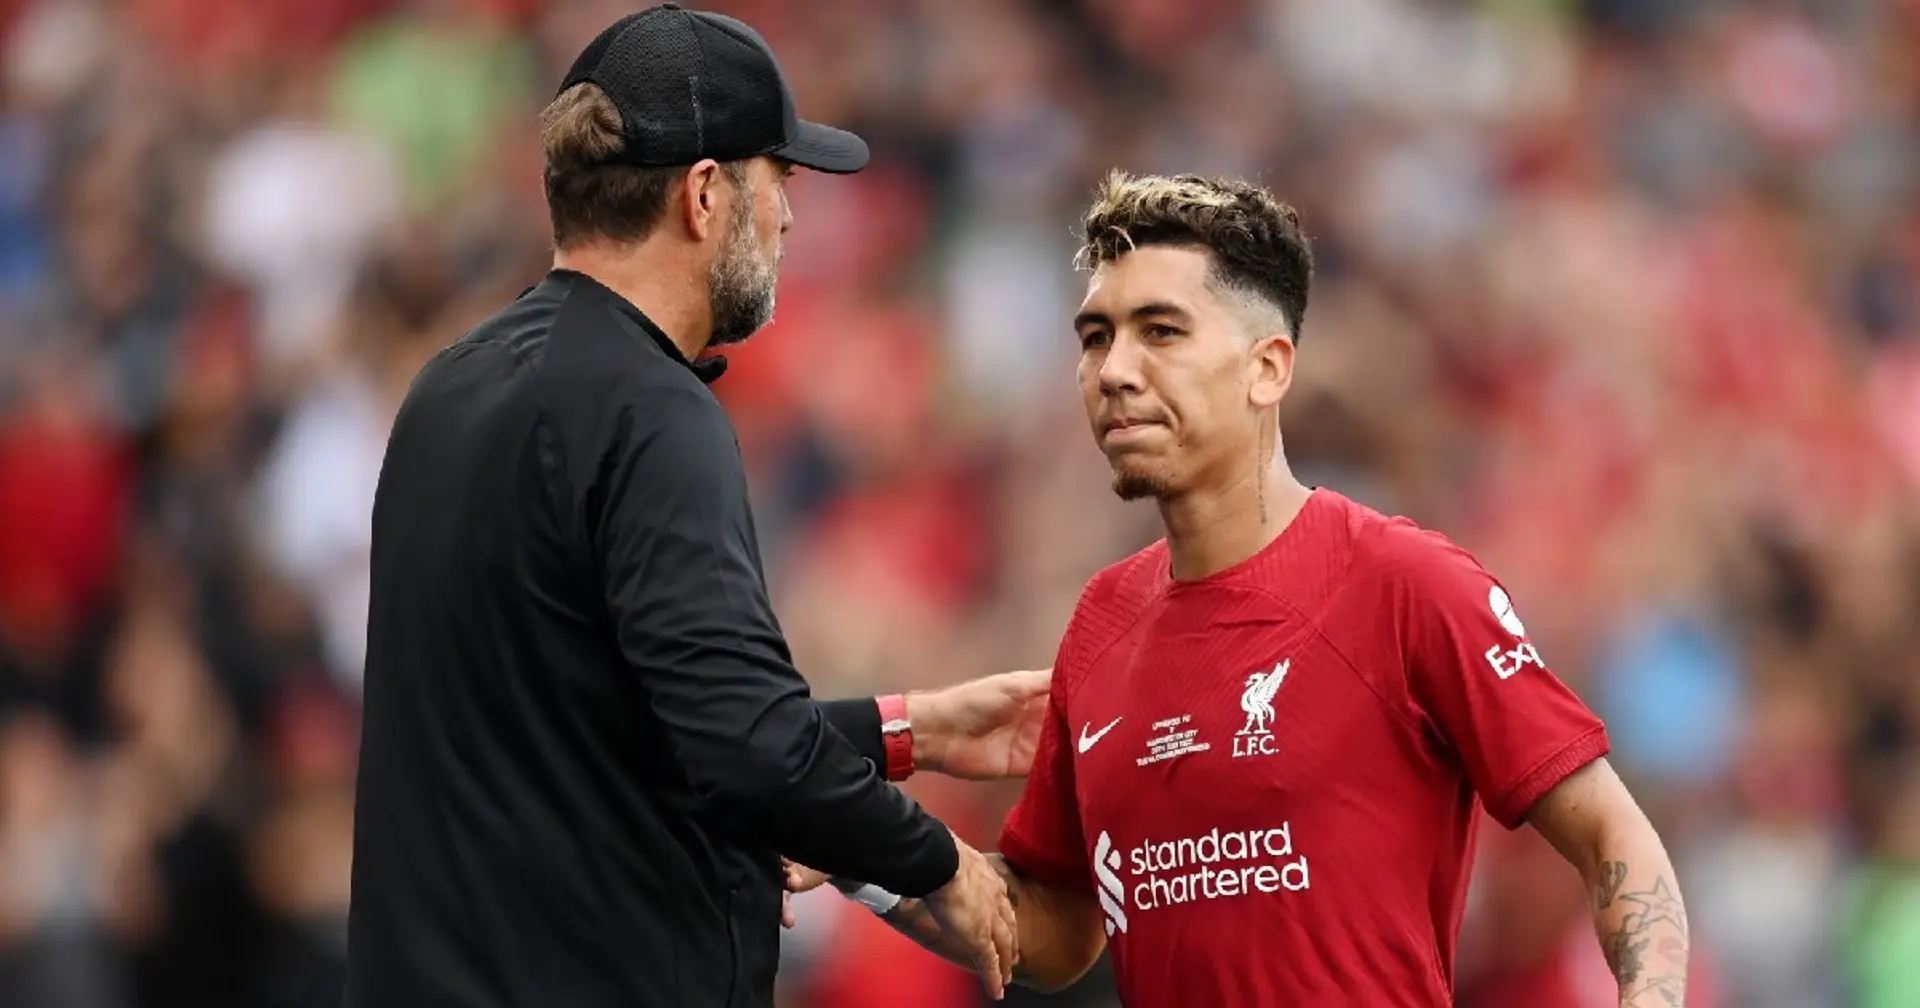 Liverpool prioritising Firmino contract extension & 2 other under-radar stories 